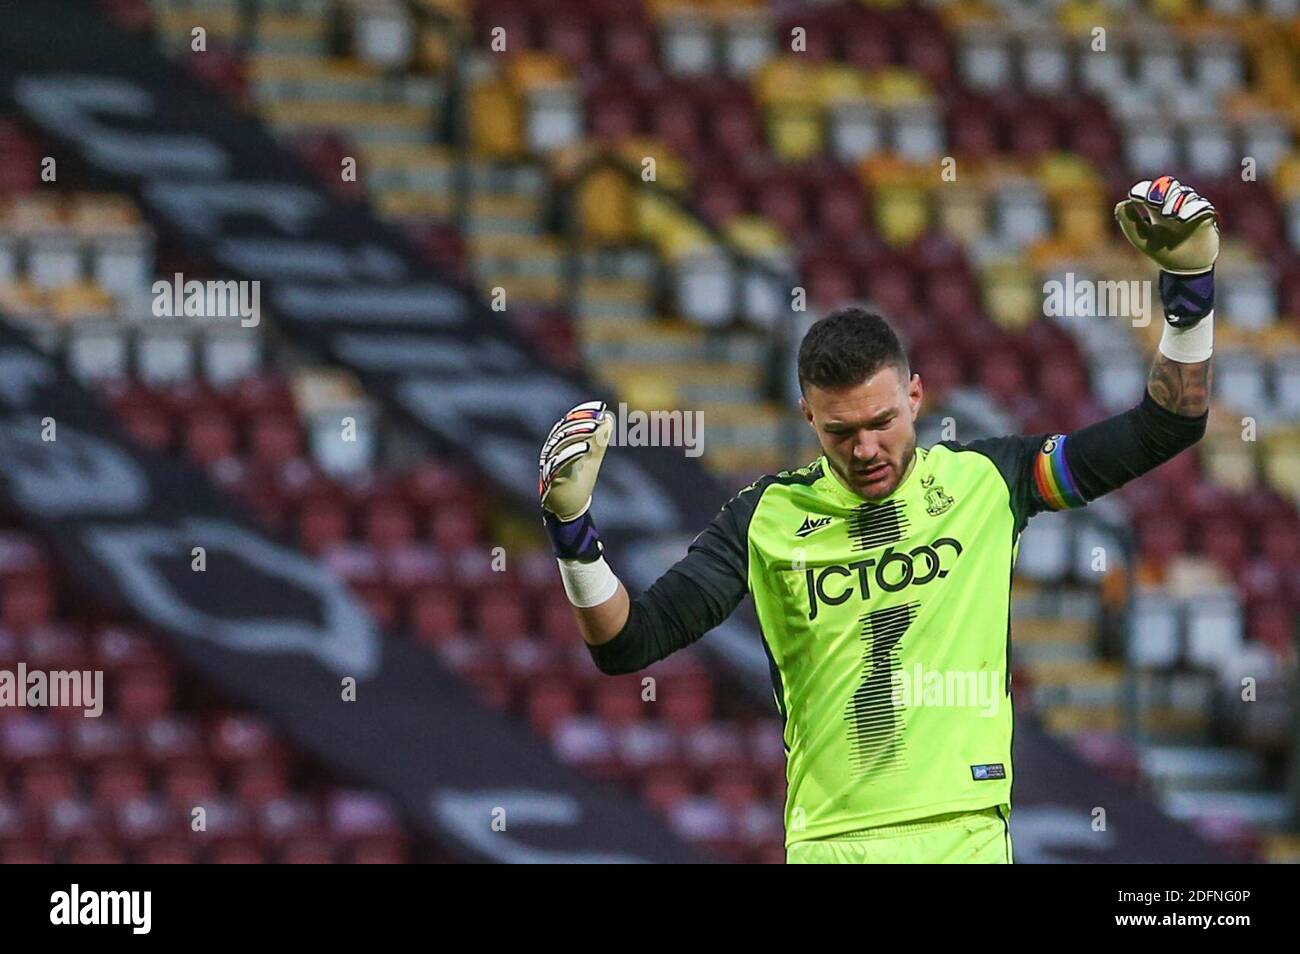 Richard ODonnell #1 of Bradford City reacts during the game Stock Photo